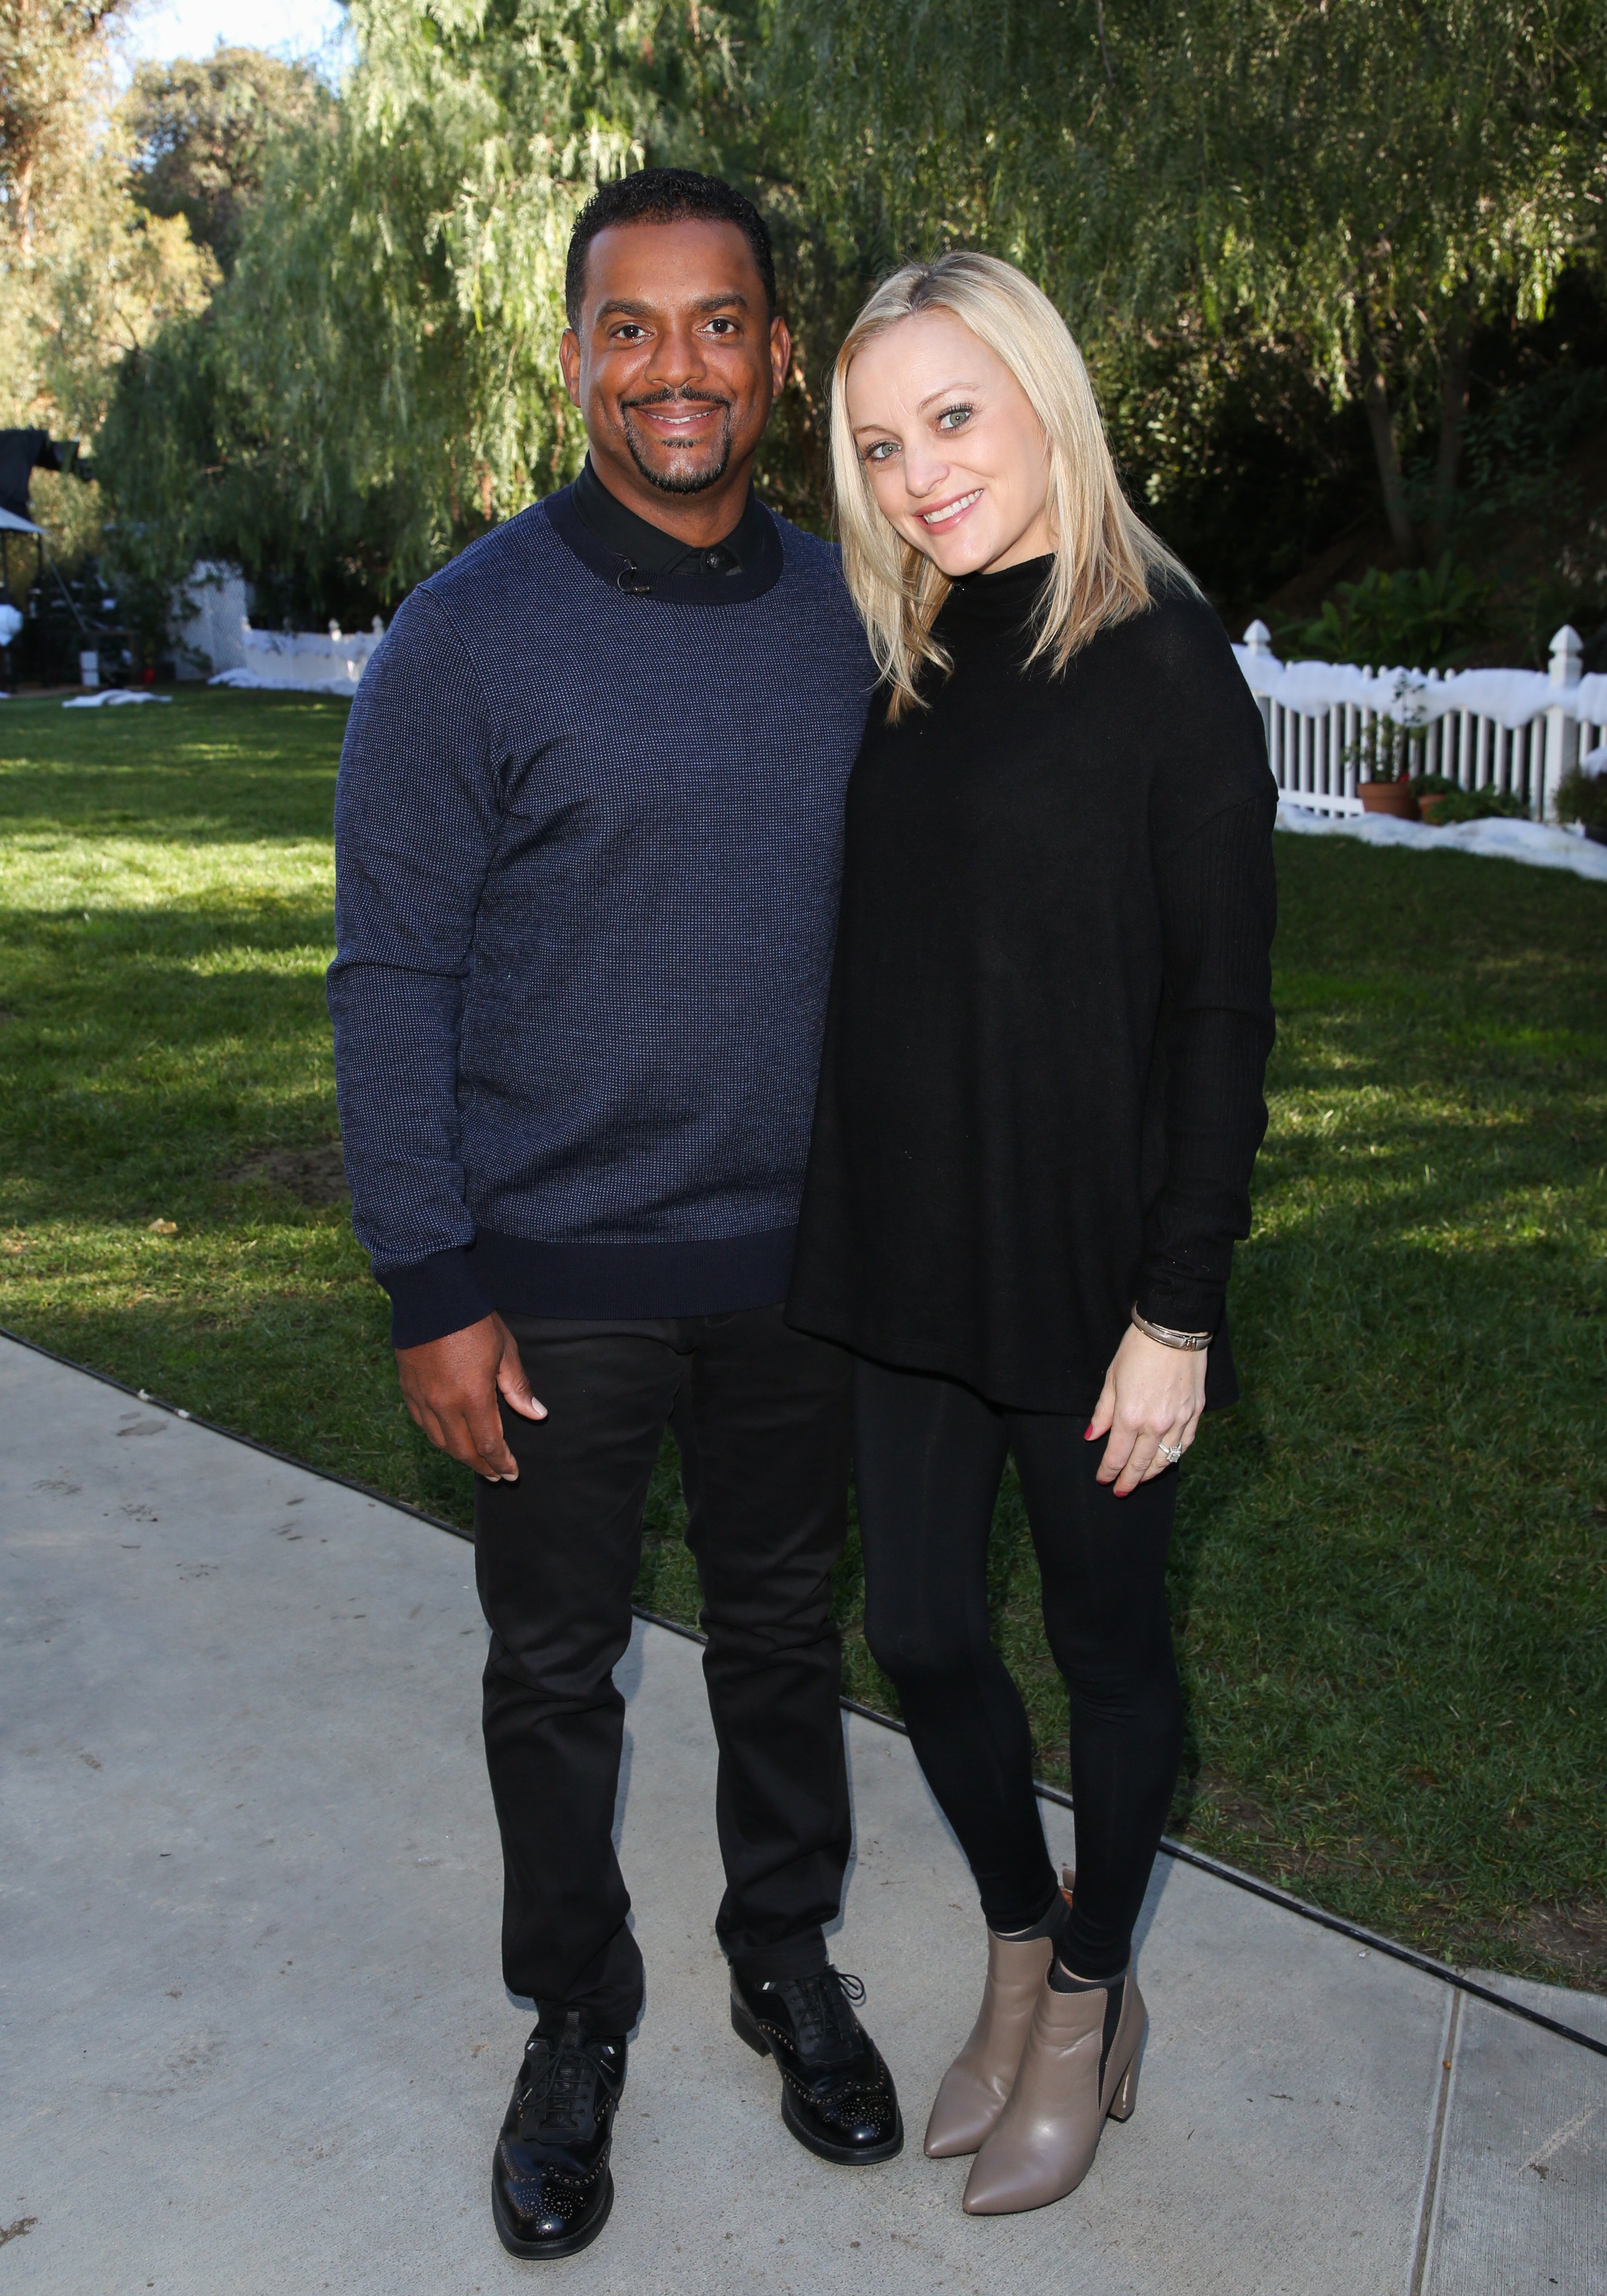 Alfonso Ribeiro and his Wife Angela Unkrich (R) visit "Home & Family" of Hallmark at Universal Studios Hollywood on December 15, 2018, in Universal City, California. | Source: Getty Images